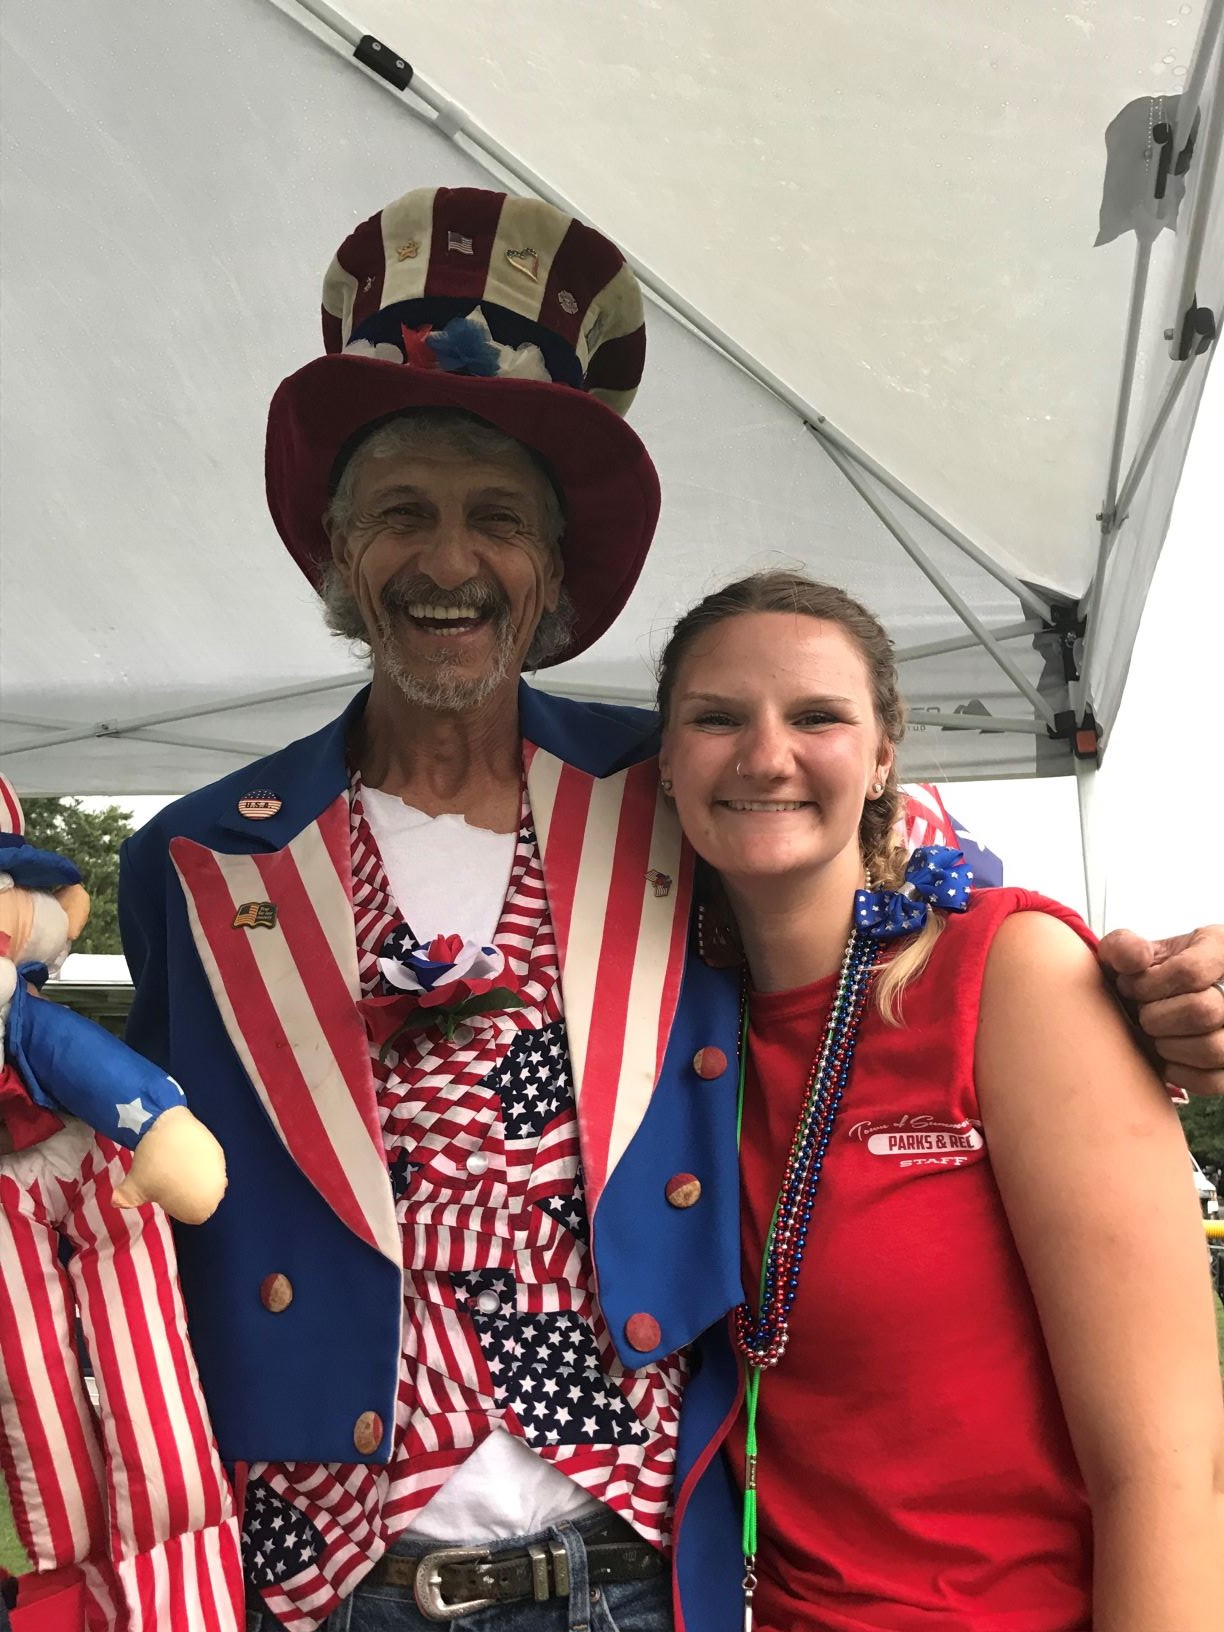 Summerville’s Special Events Coordinator Megan Boisvert, right, is joined by Dave Burke at the town’s Fourth of July celebration